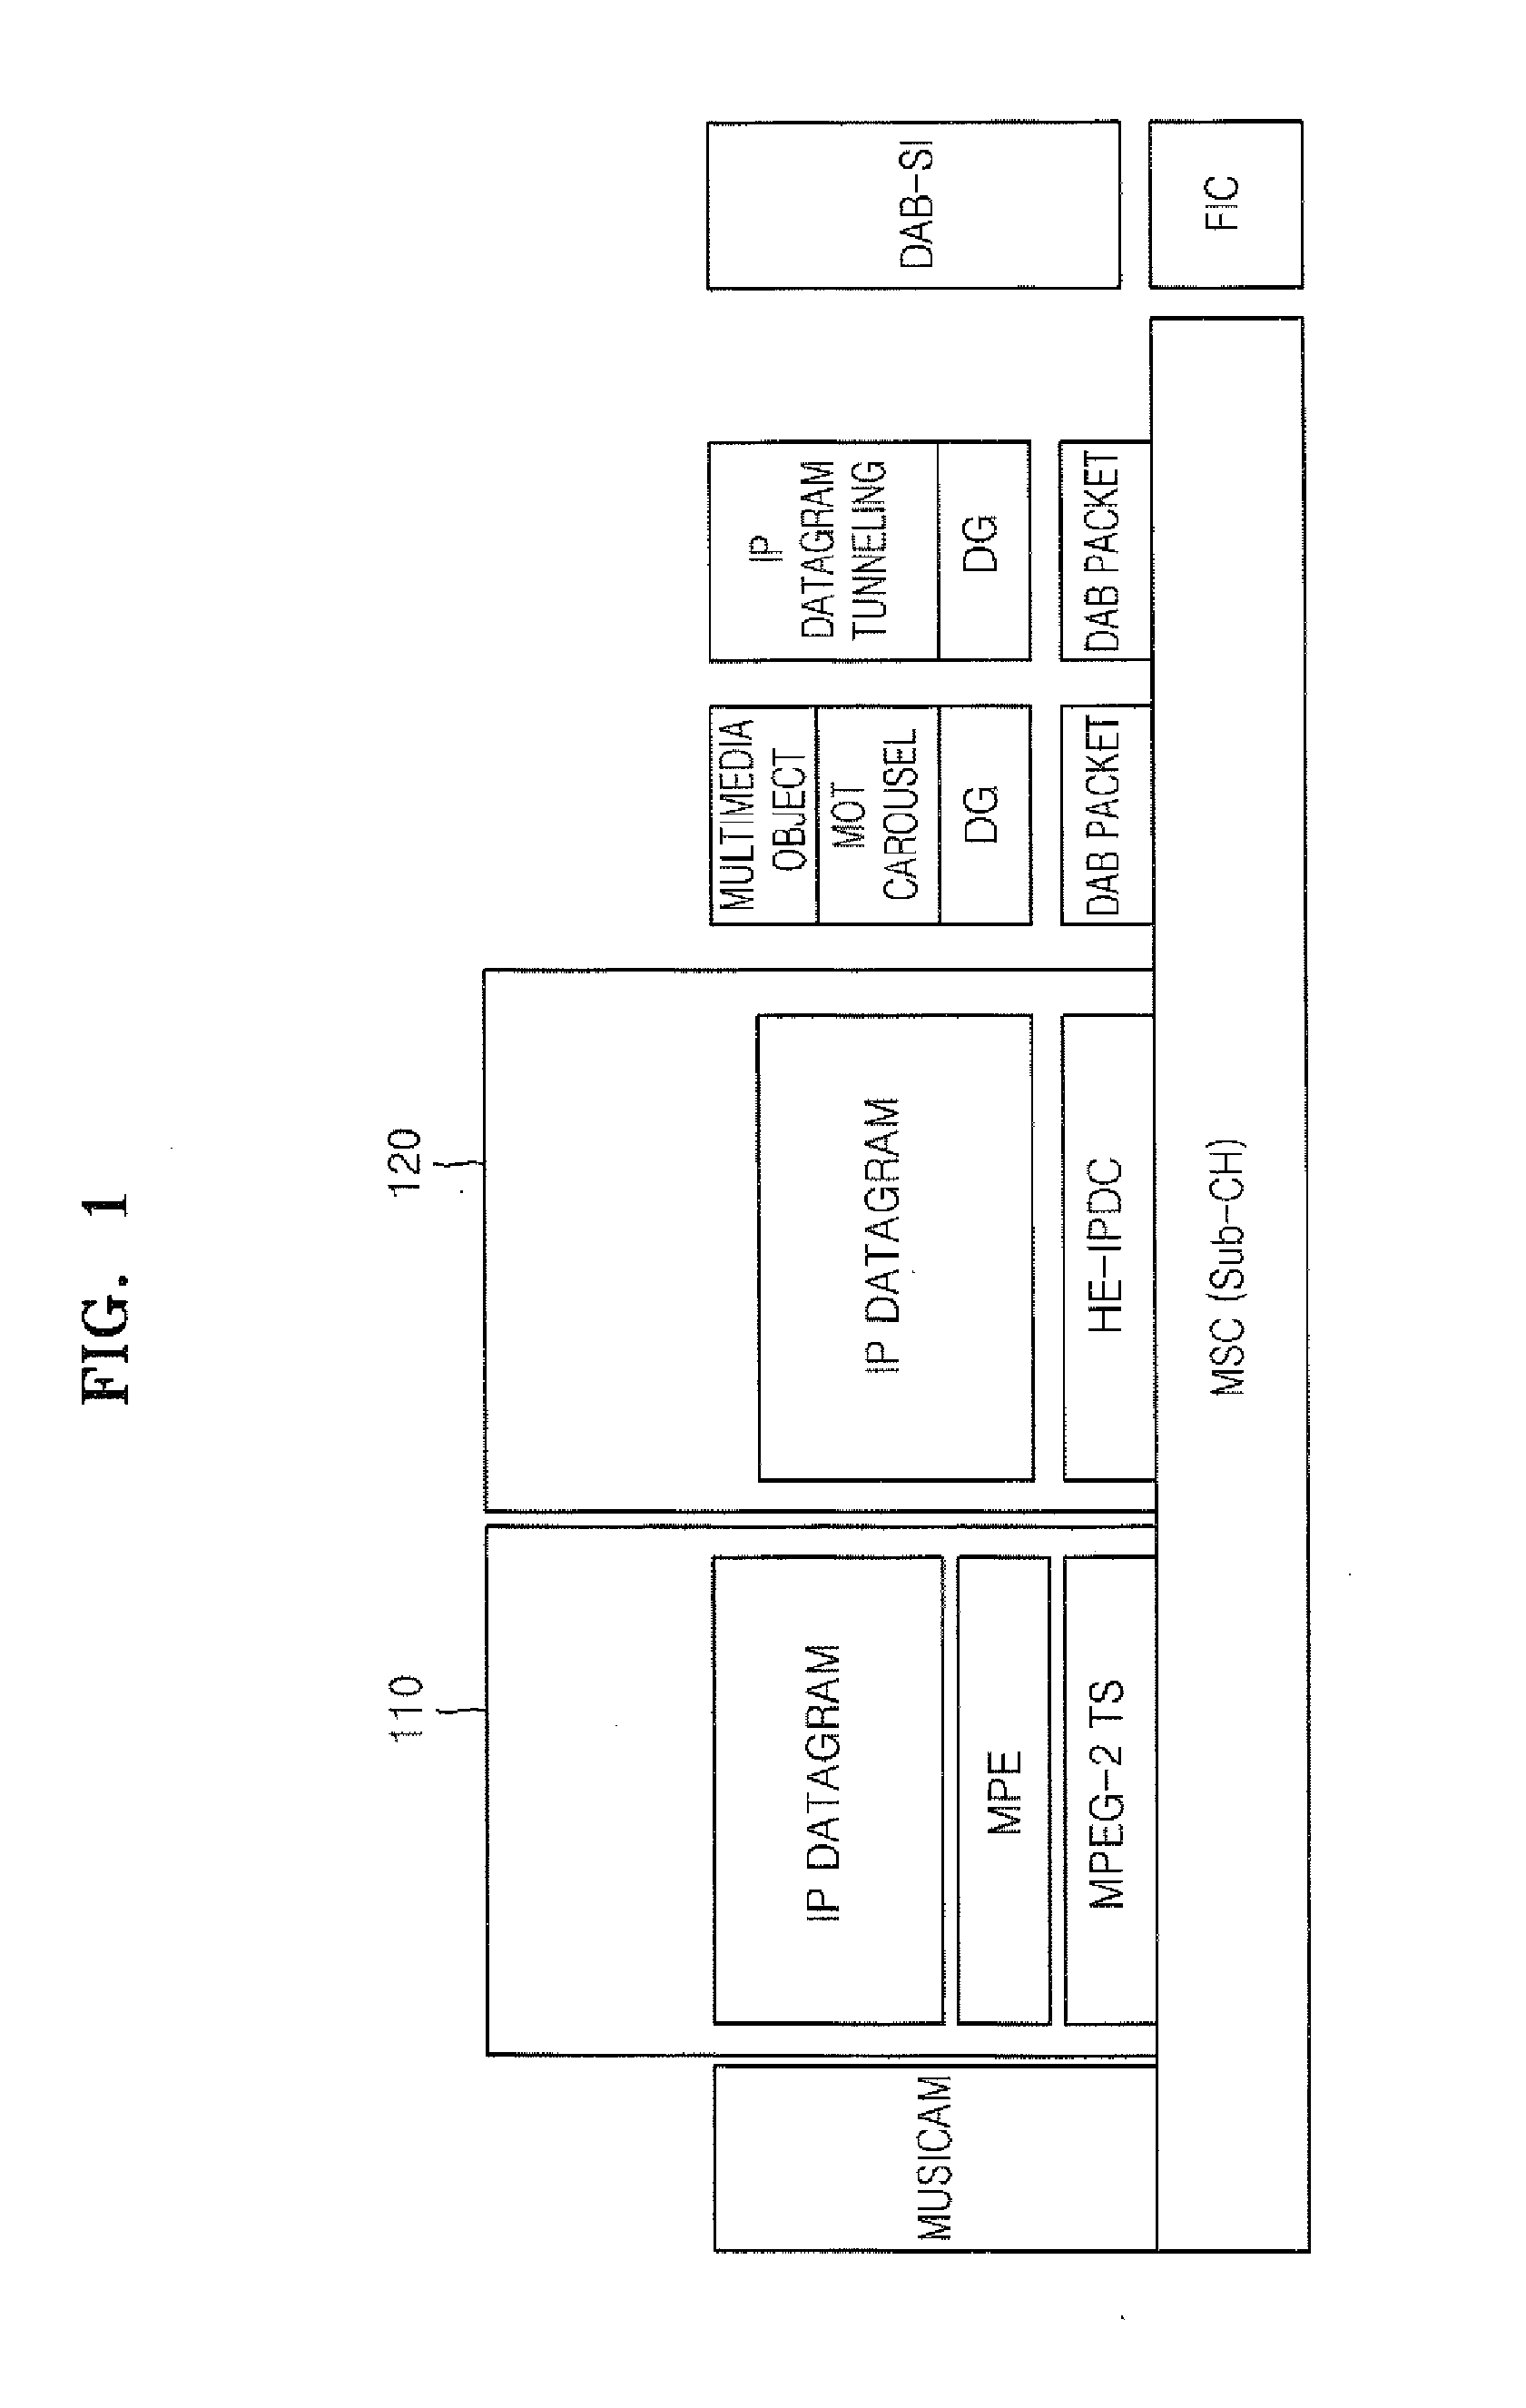 Method and apparatus for providing internet protocol datacasting(IPDC) service, and method and apparatus for processing ipdc service